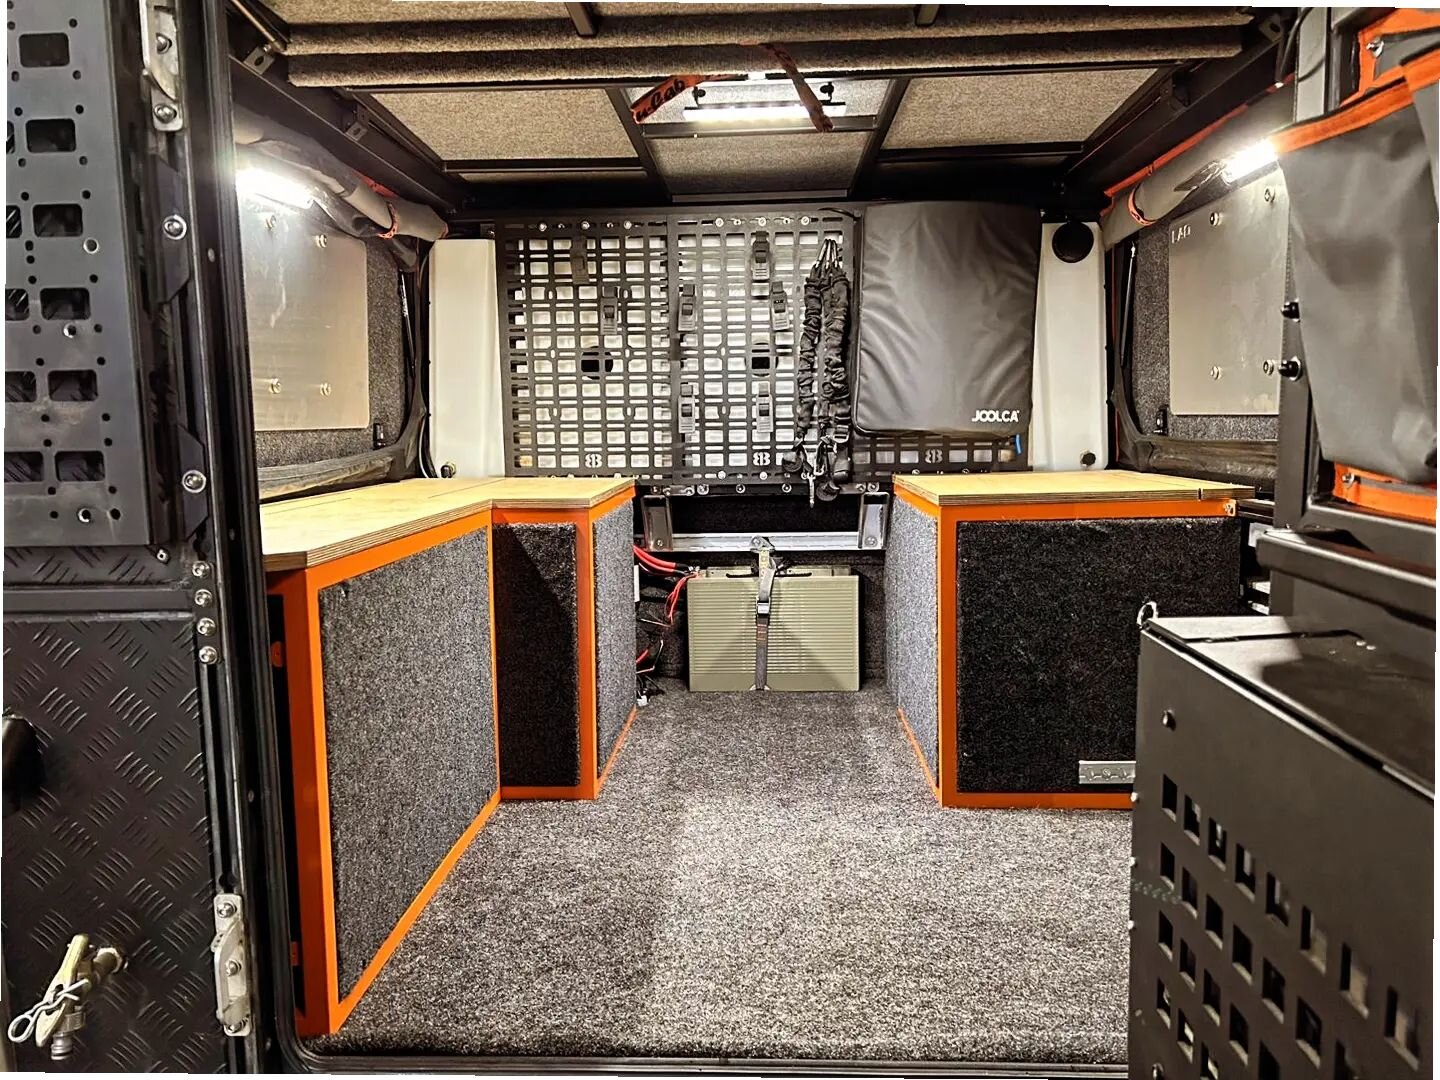 The interior of @iam_thecake 's awesome build only gets better on closer inspection! 
The interior of both the camper and the cab were a labour of love. The camper features a full 12v system, making use a range of Victron products, and were all monit